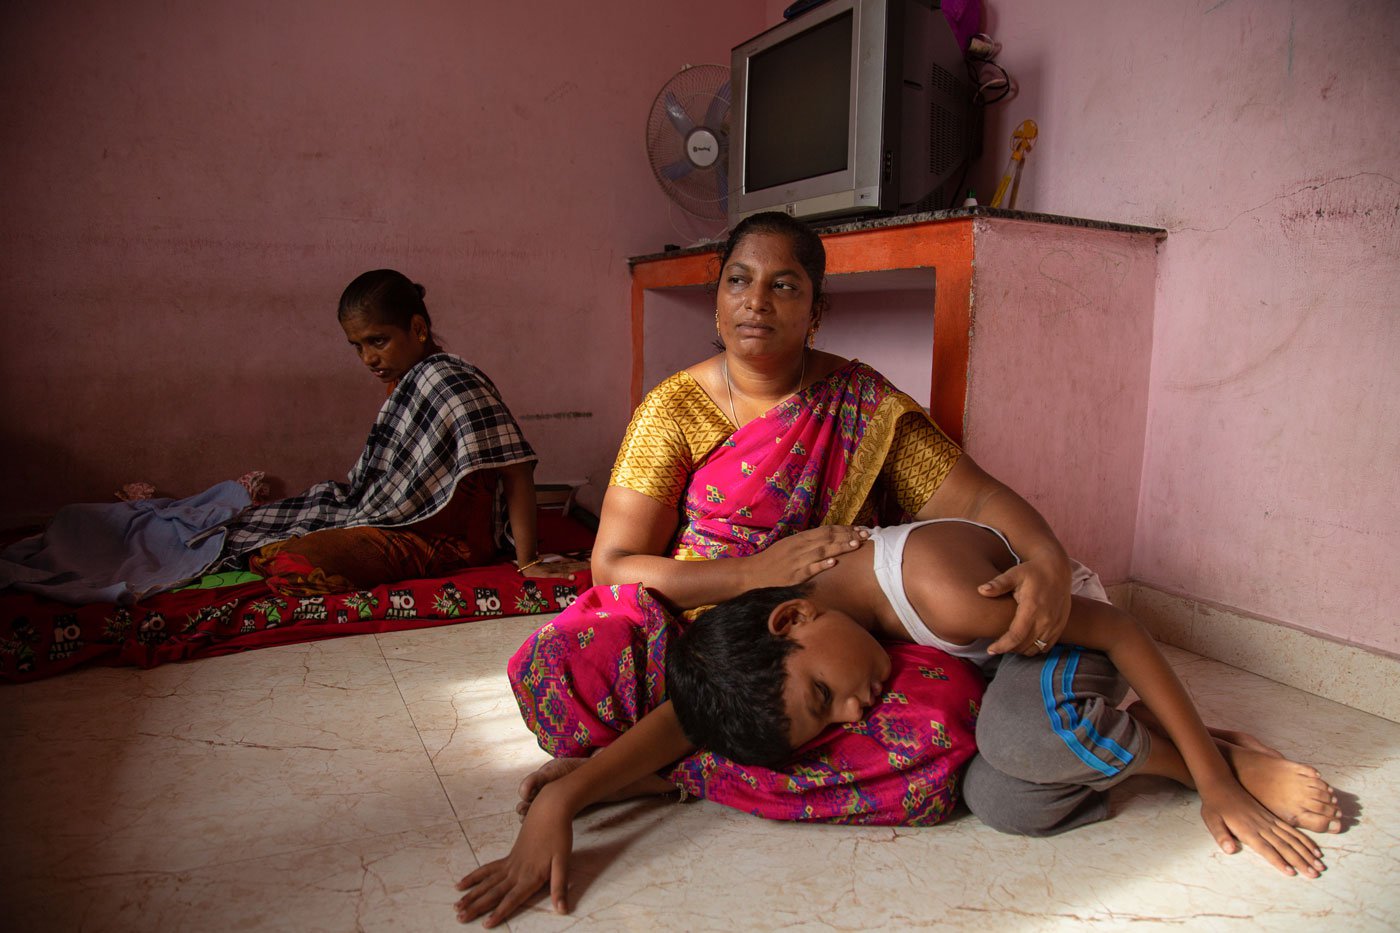 Saranya with her son Manase on her lap. 'My second son [Manase] won't eat if I am not there'